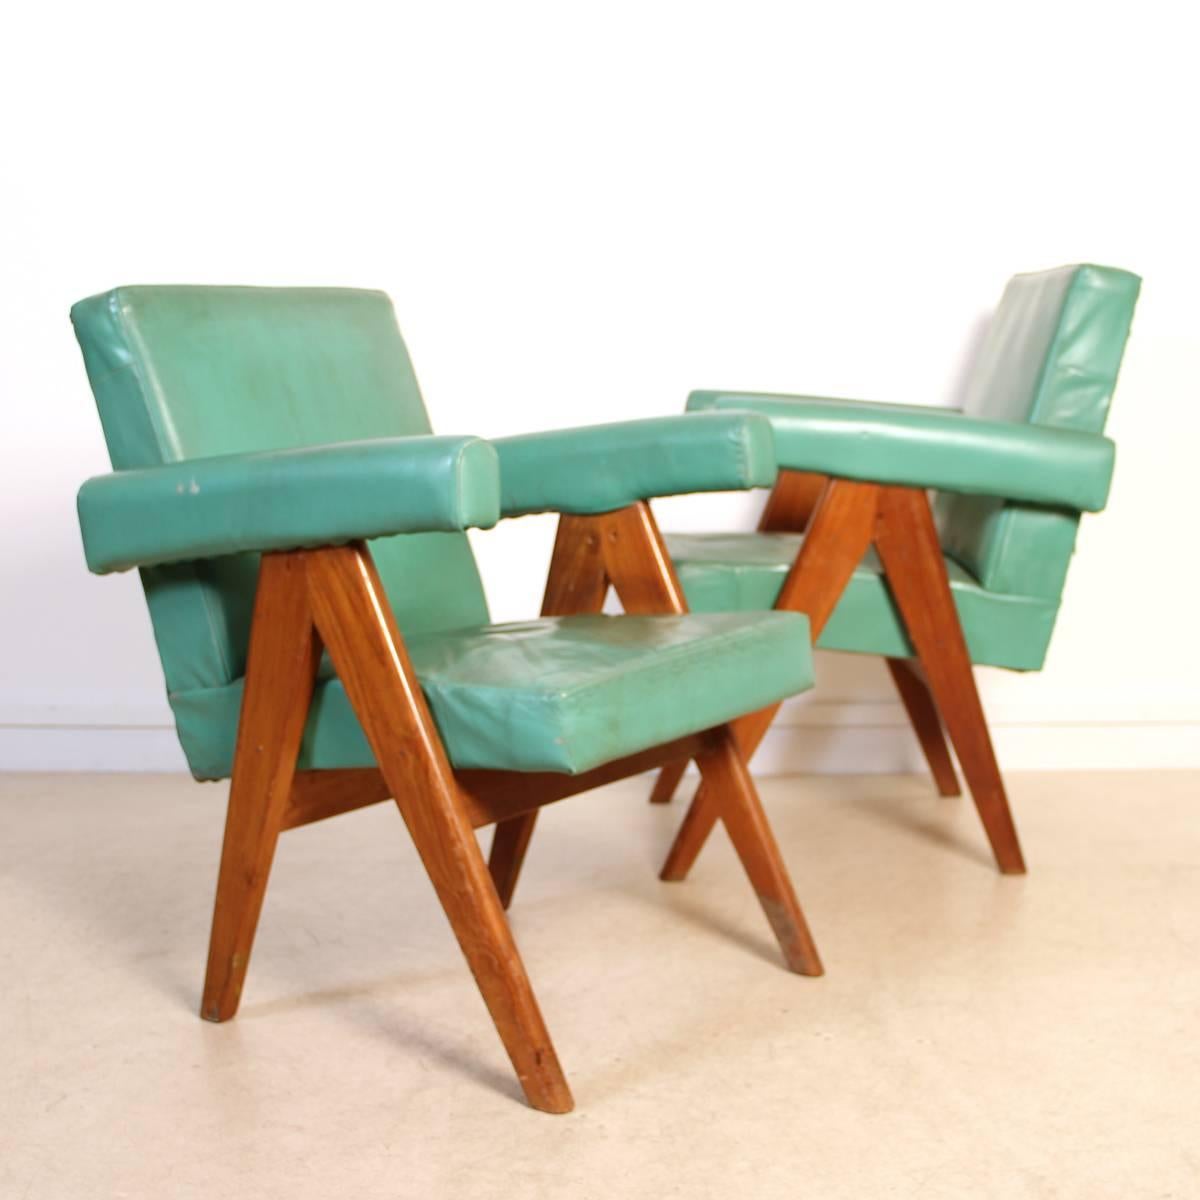 Mid-20th Century Set of Two Committee Chair by Pierre Jeanneret, Chandigarh, circa 1953